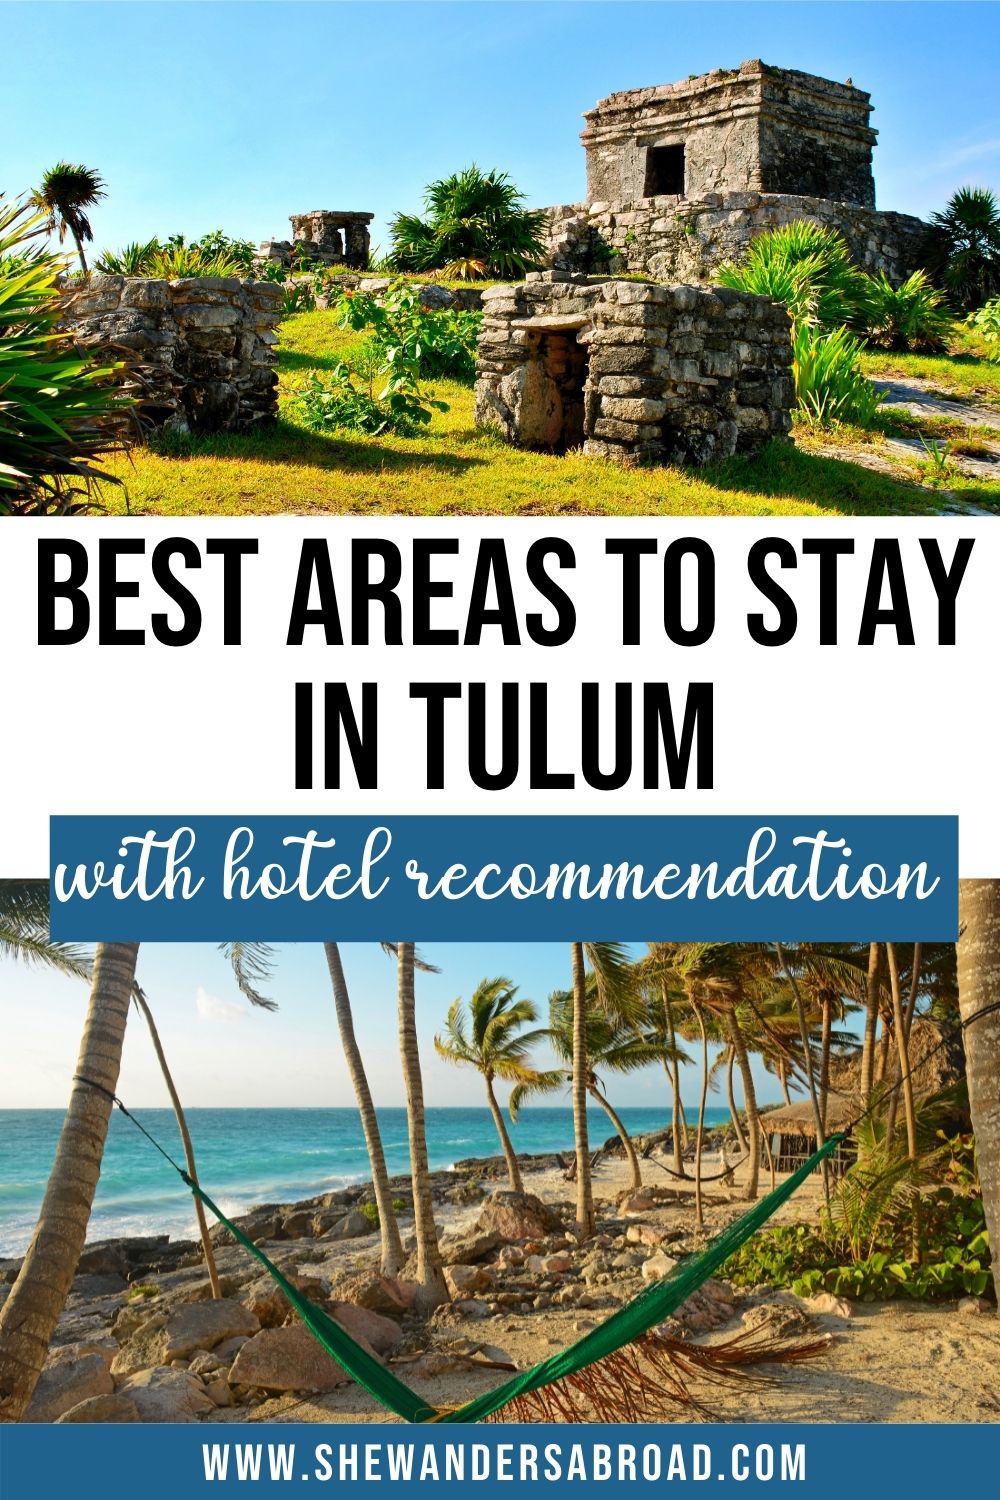 Best Areas to Stay in Tulum